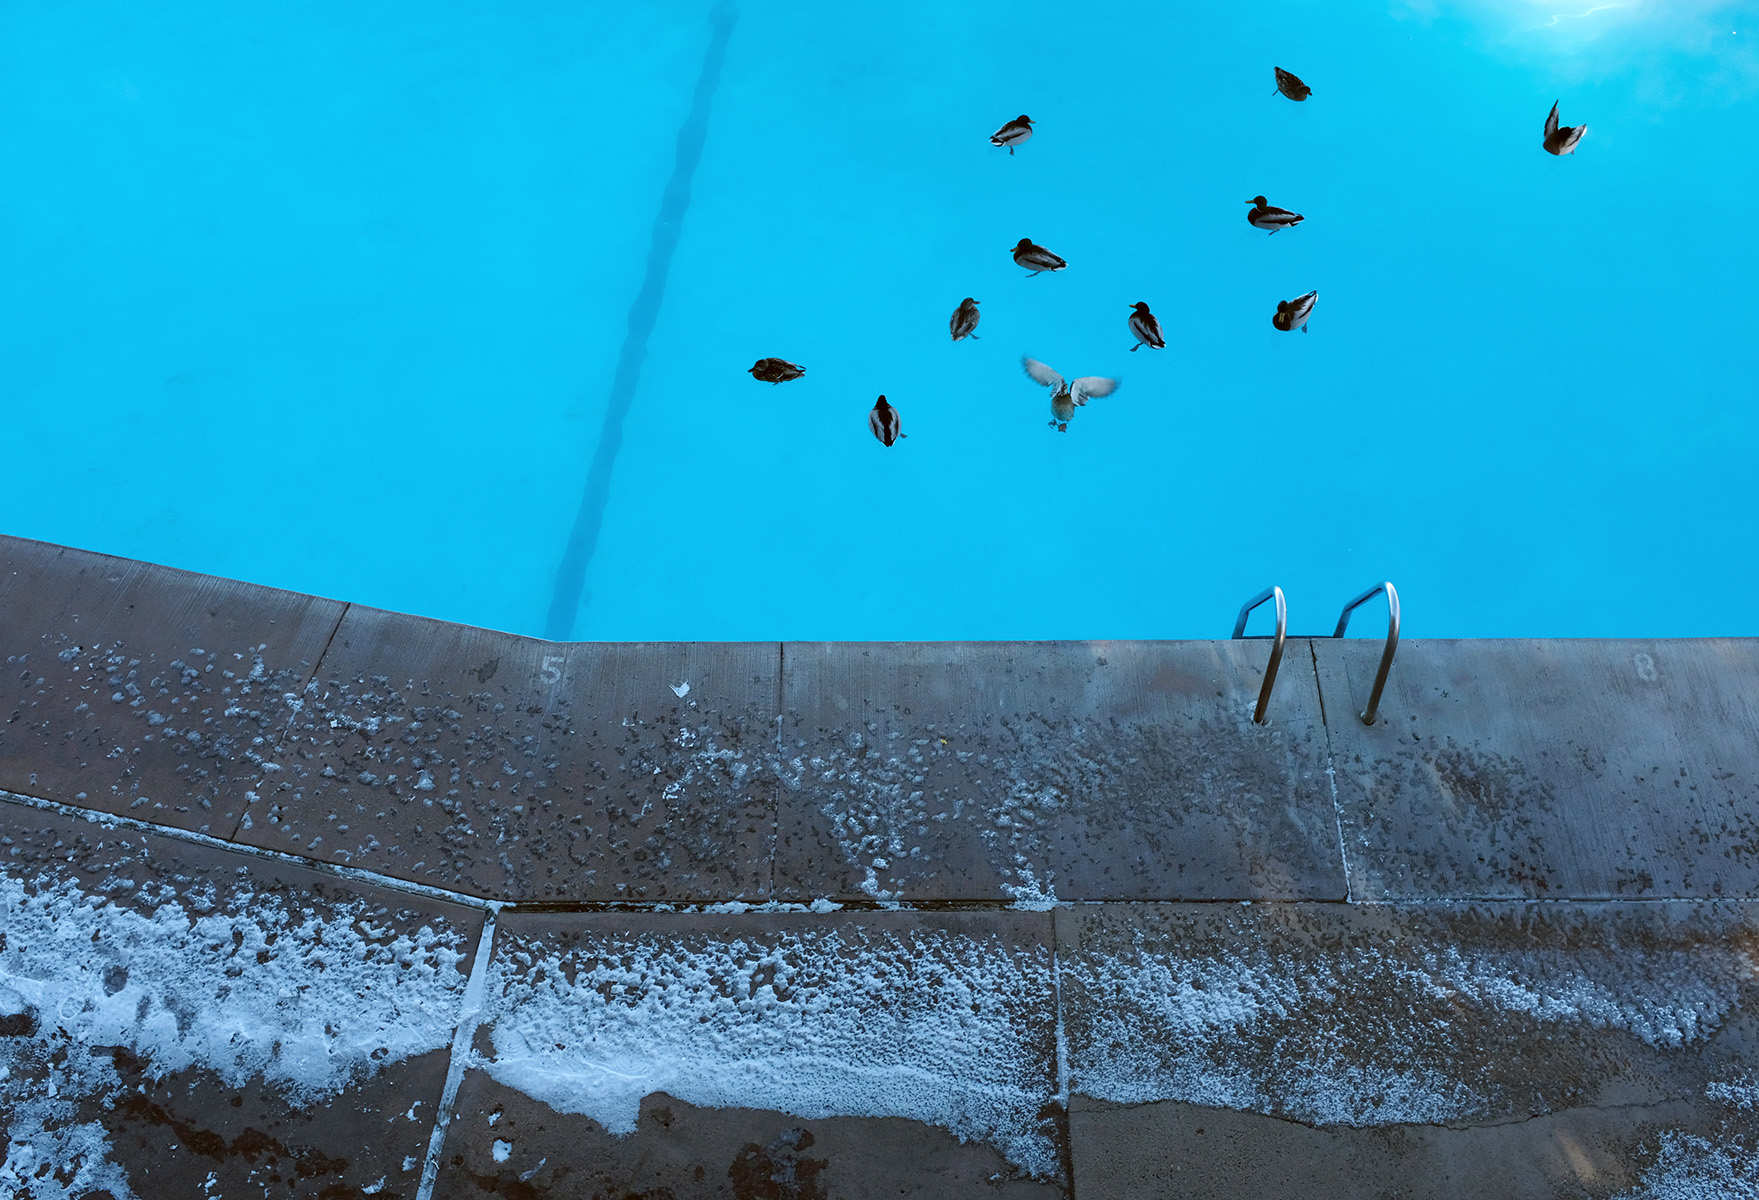 Ducks bathe and splash around in a hotel pool near snow-covered grounds in South Lake Tahoe.